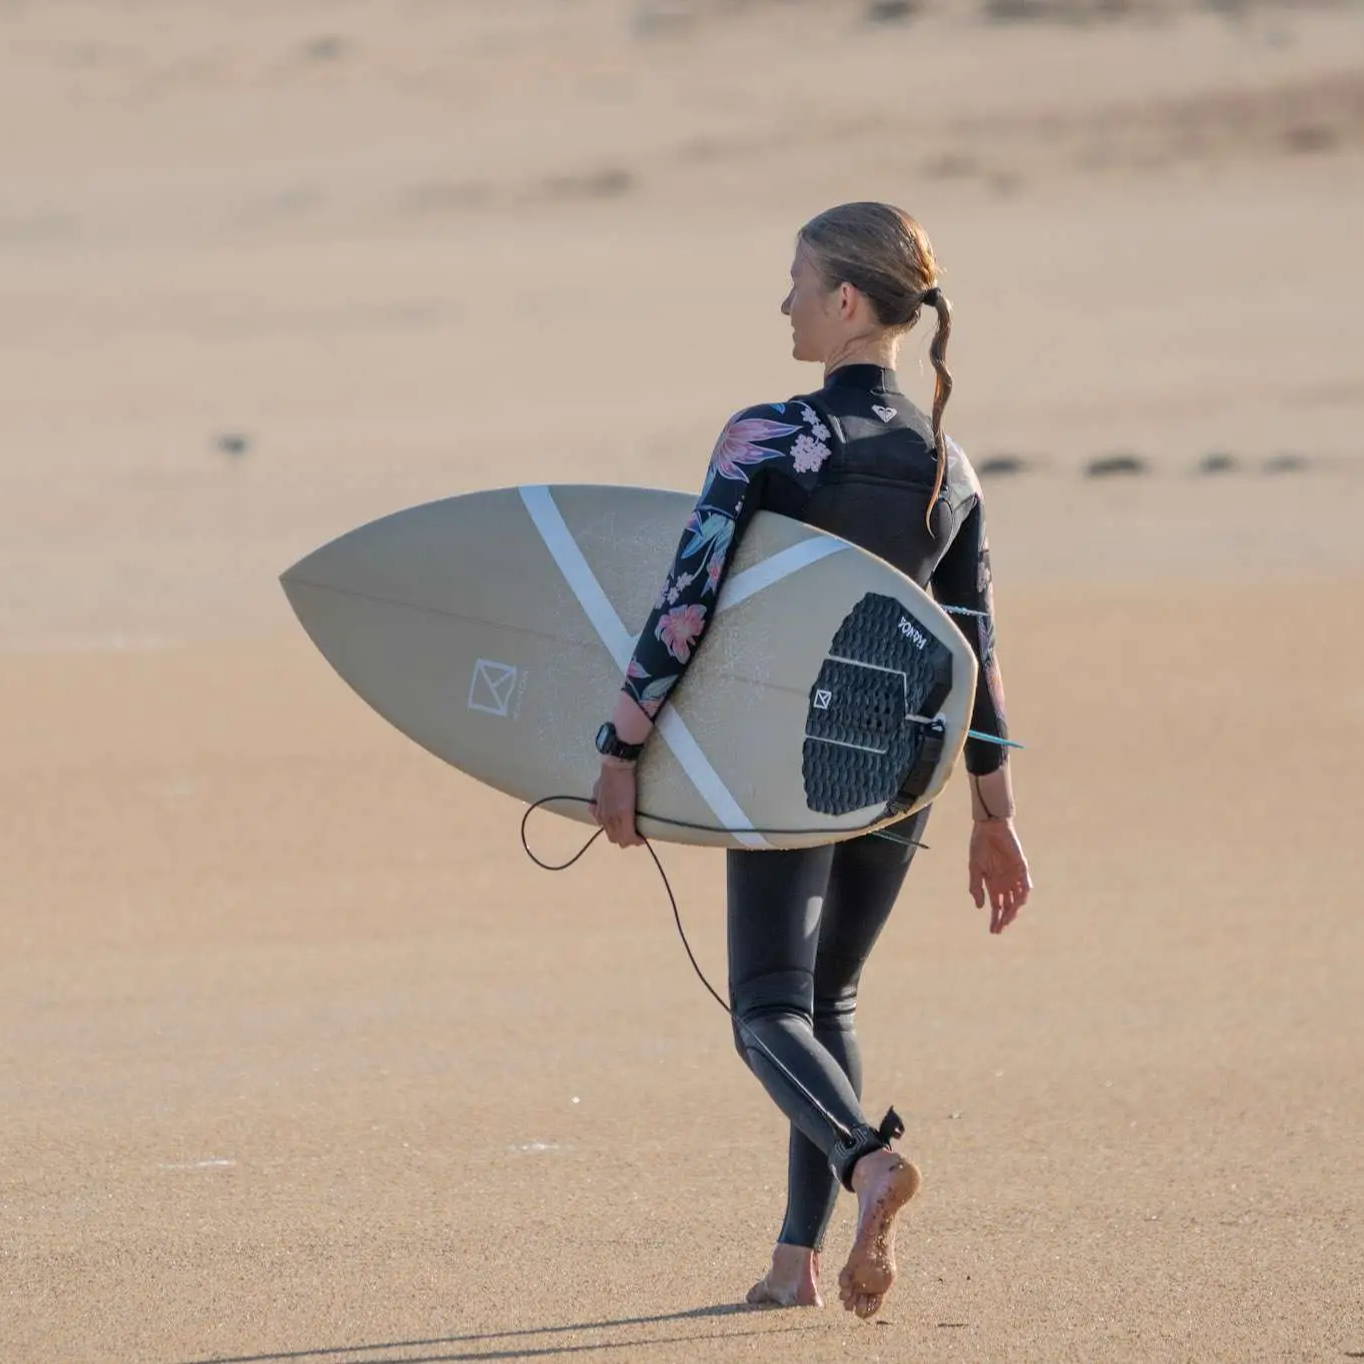 Eco Performance Surfboards - shop Sustainable surfboards